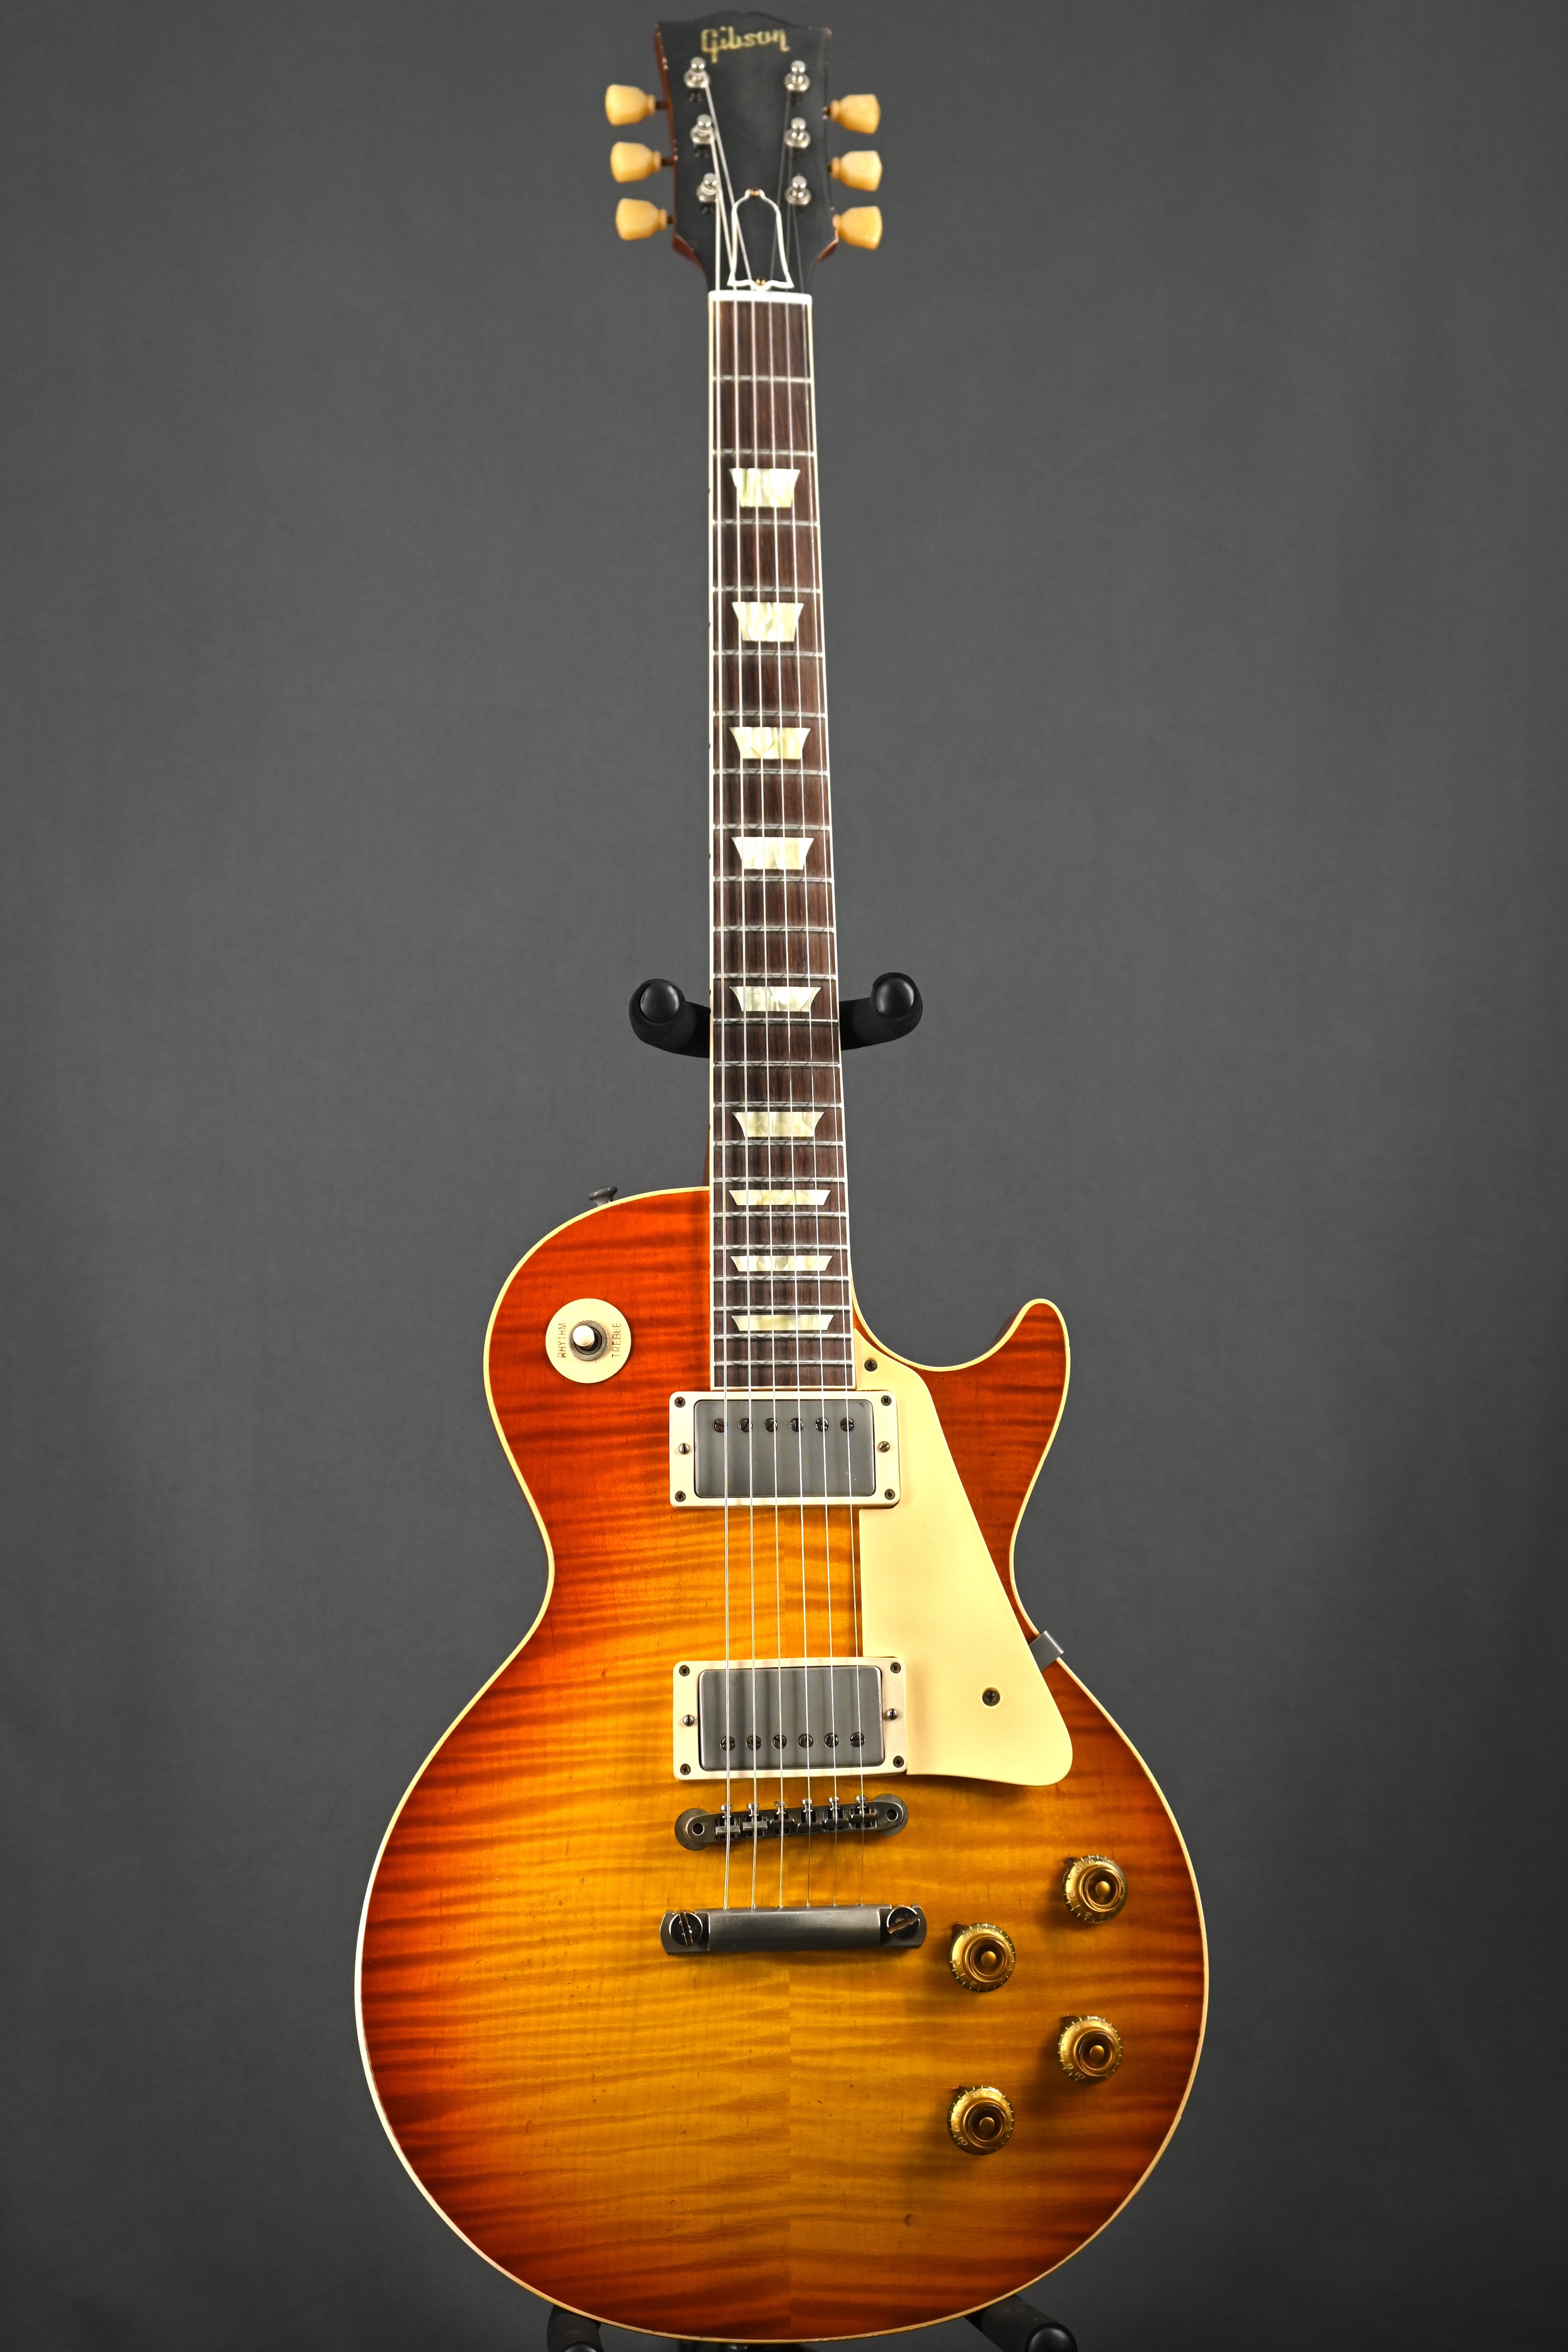 '59 Les Paul Standard Reissue Limited Edition Murphy Lab Aged with Brazilian Rosewood - Tom's Tea